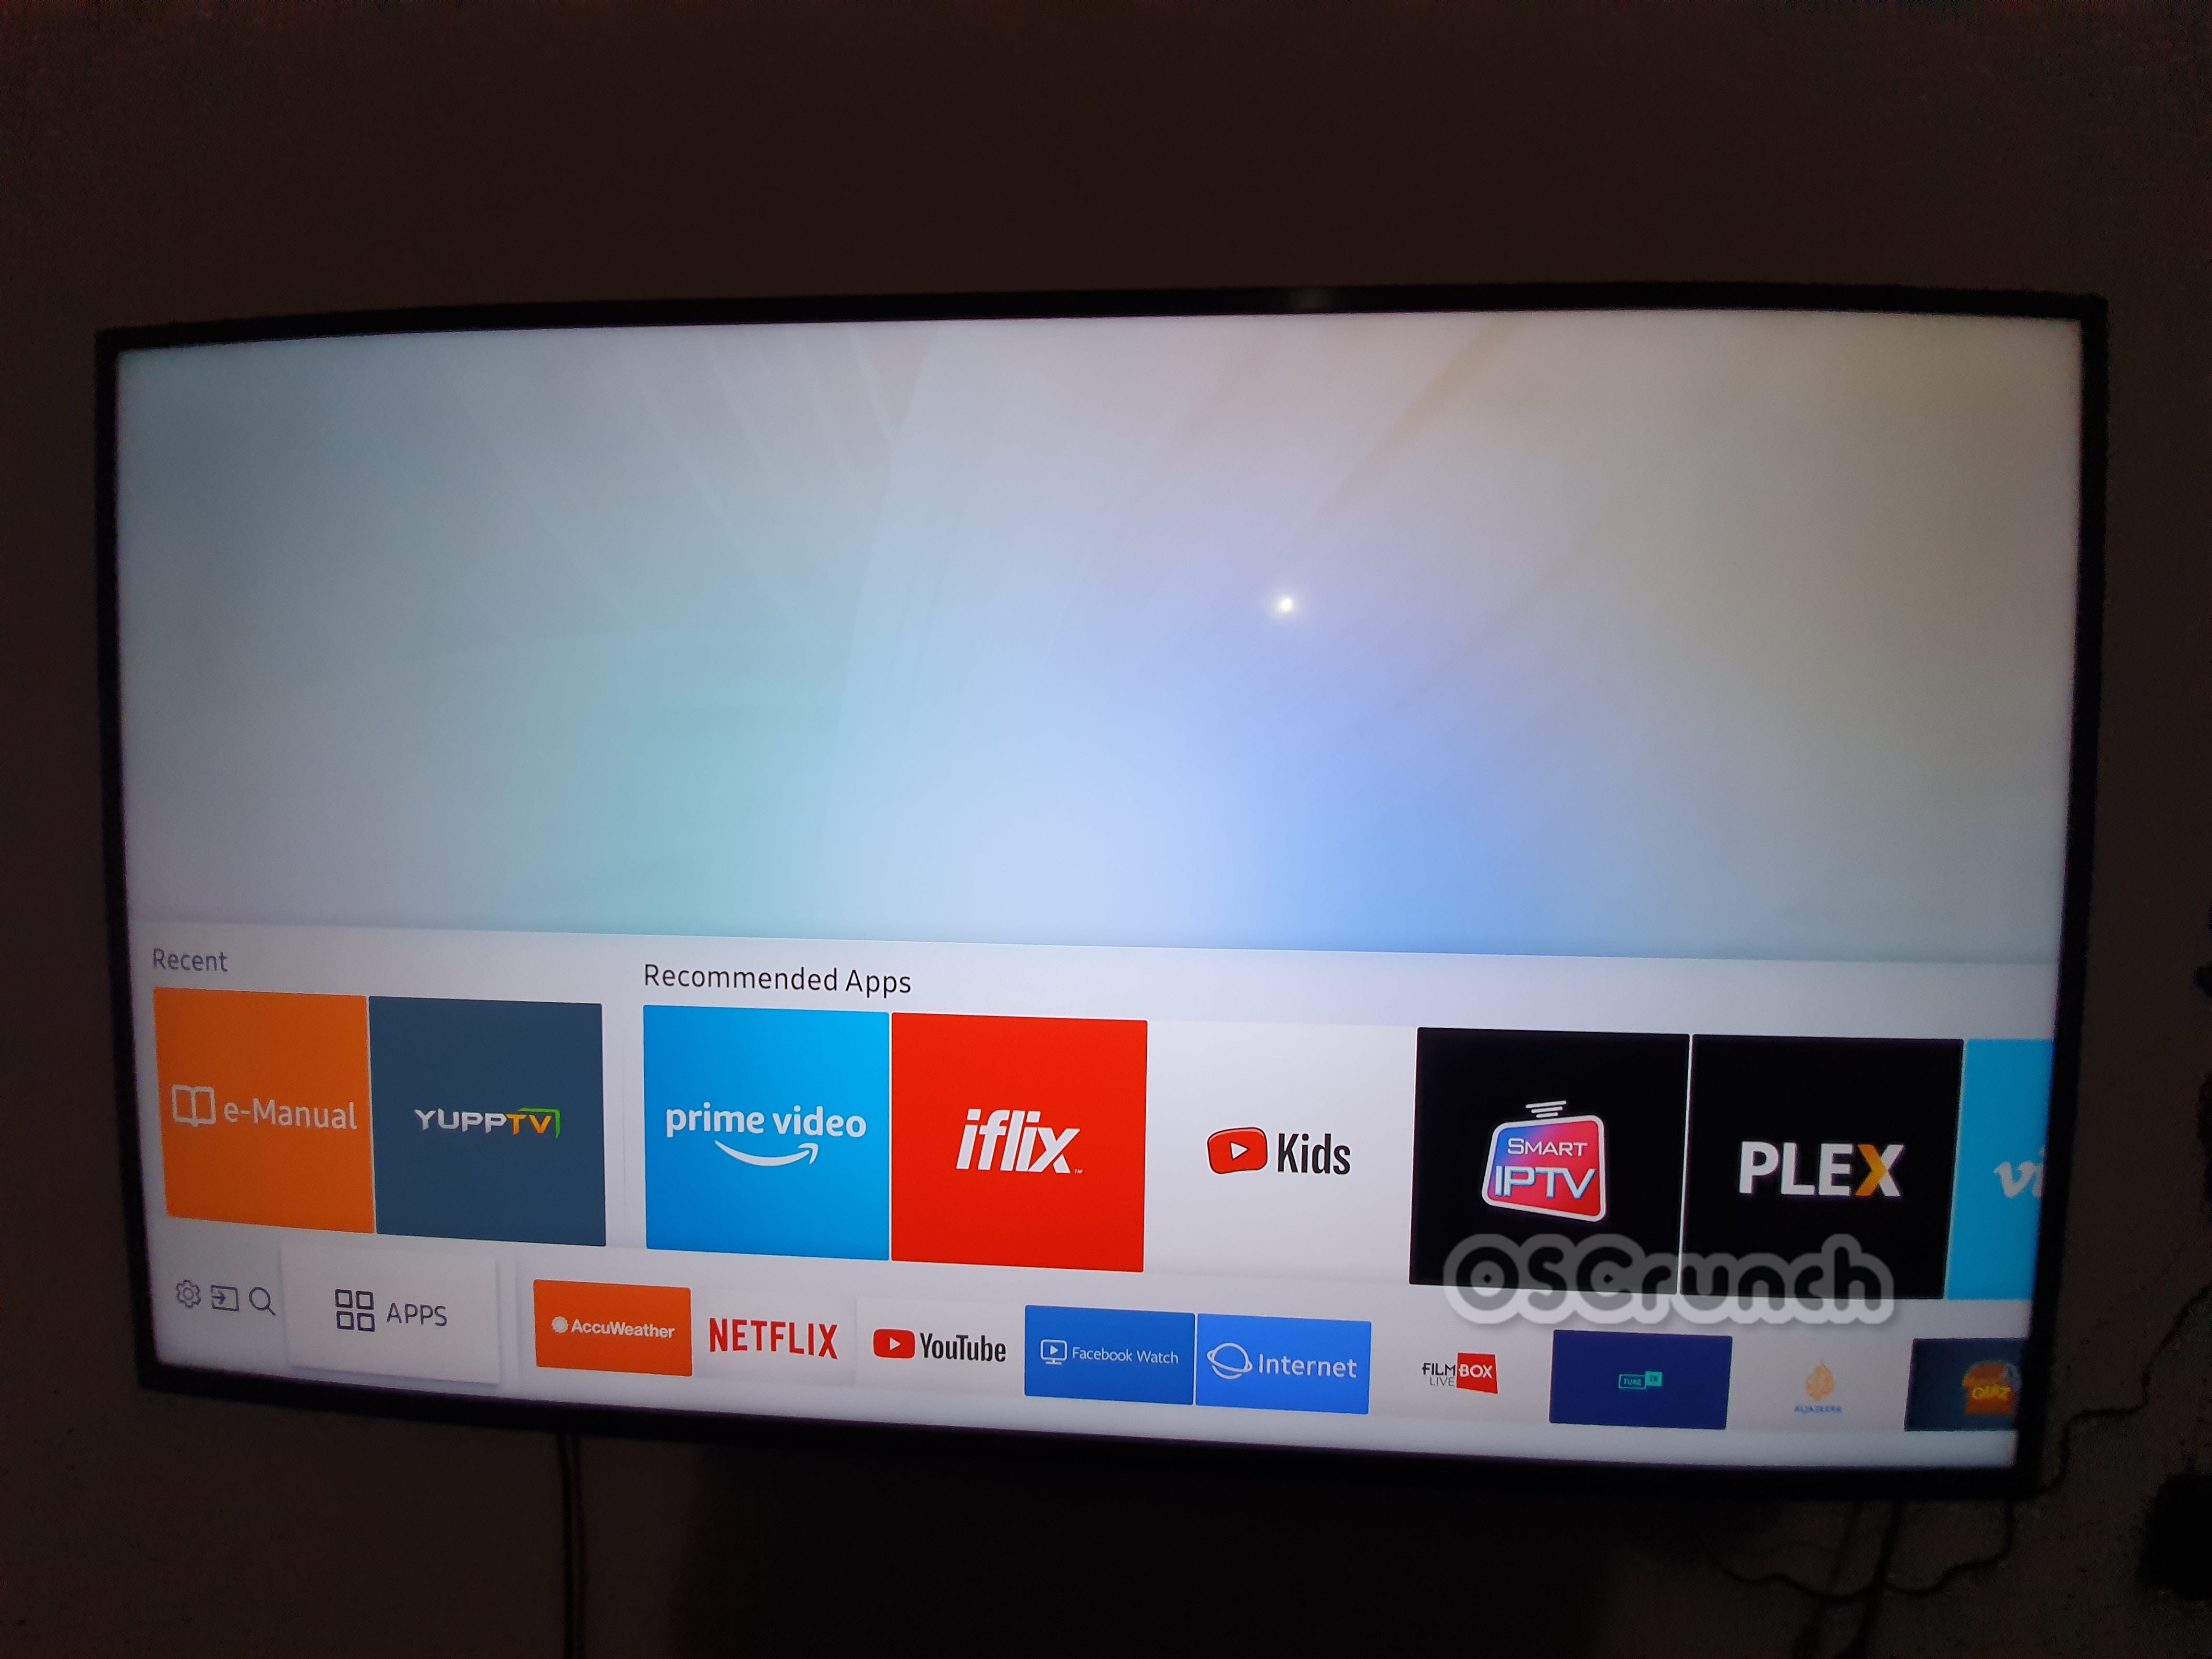 How To Install Pluto Tv On Samsung Smart Tv - Install Pluto On Samsung Tv - How To Install Pluto TV on ...